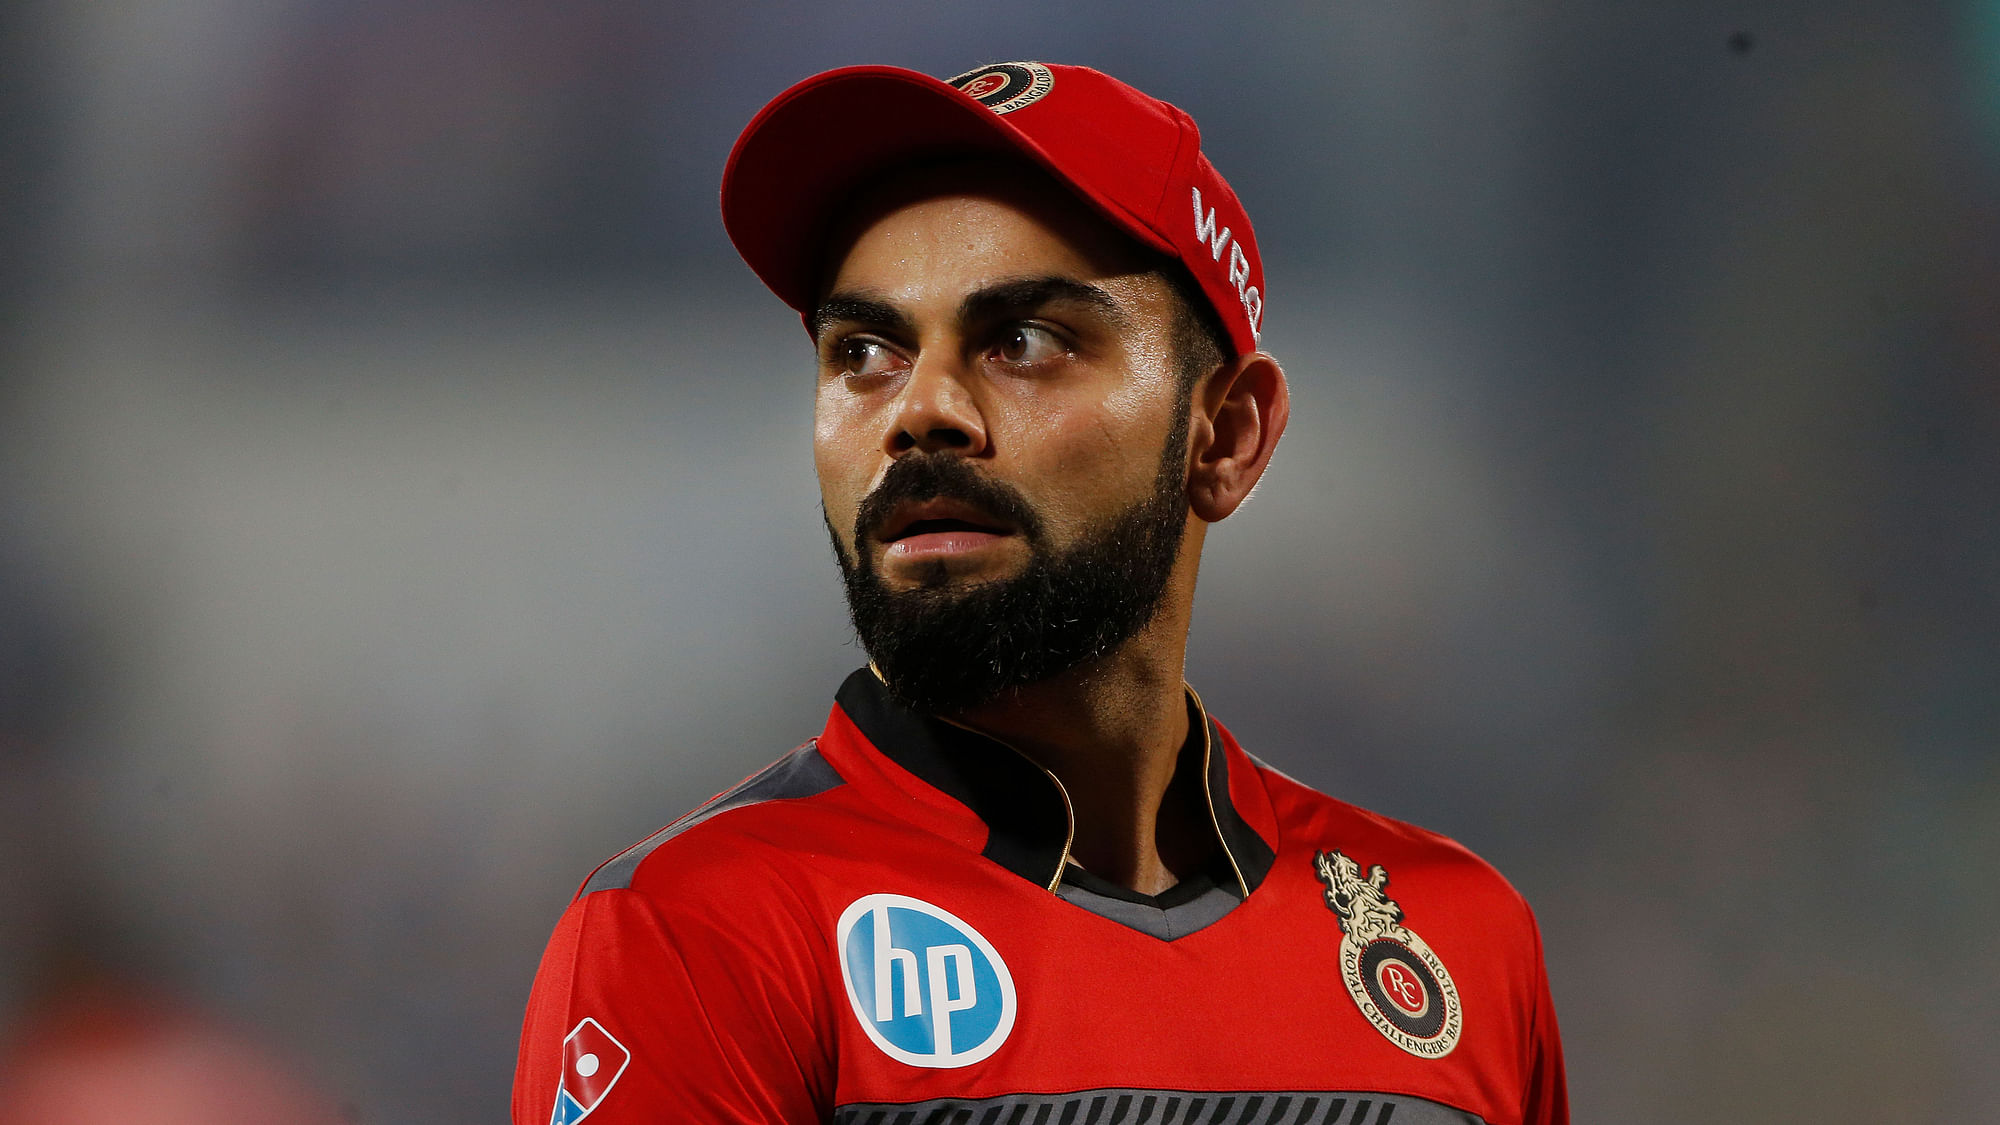 Virat Kohli posted a video on social media, apologising to fans for RCB’s dismal performance in IPL 2018.